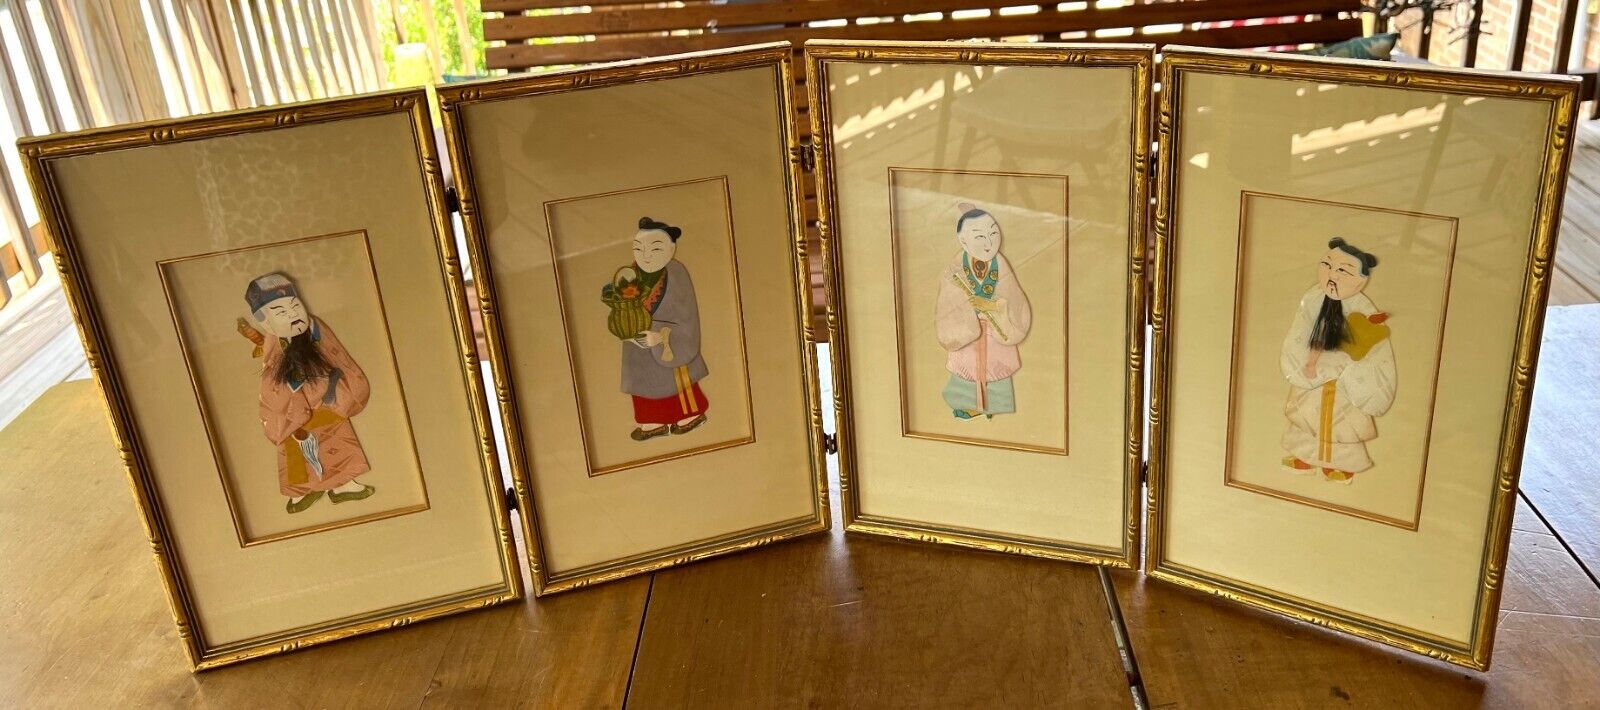 Handmade Paper and Fabric Chinese Paper Dolls Set of 4 Framed